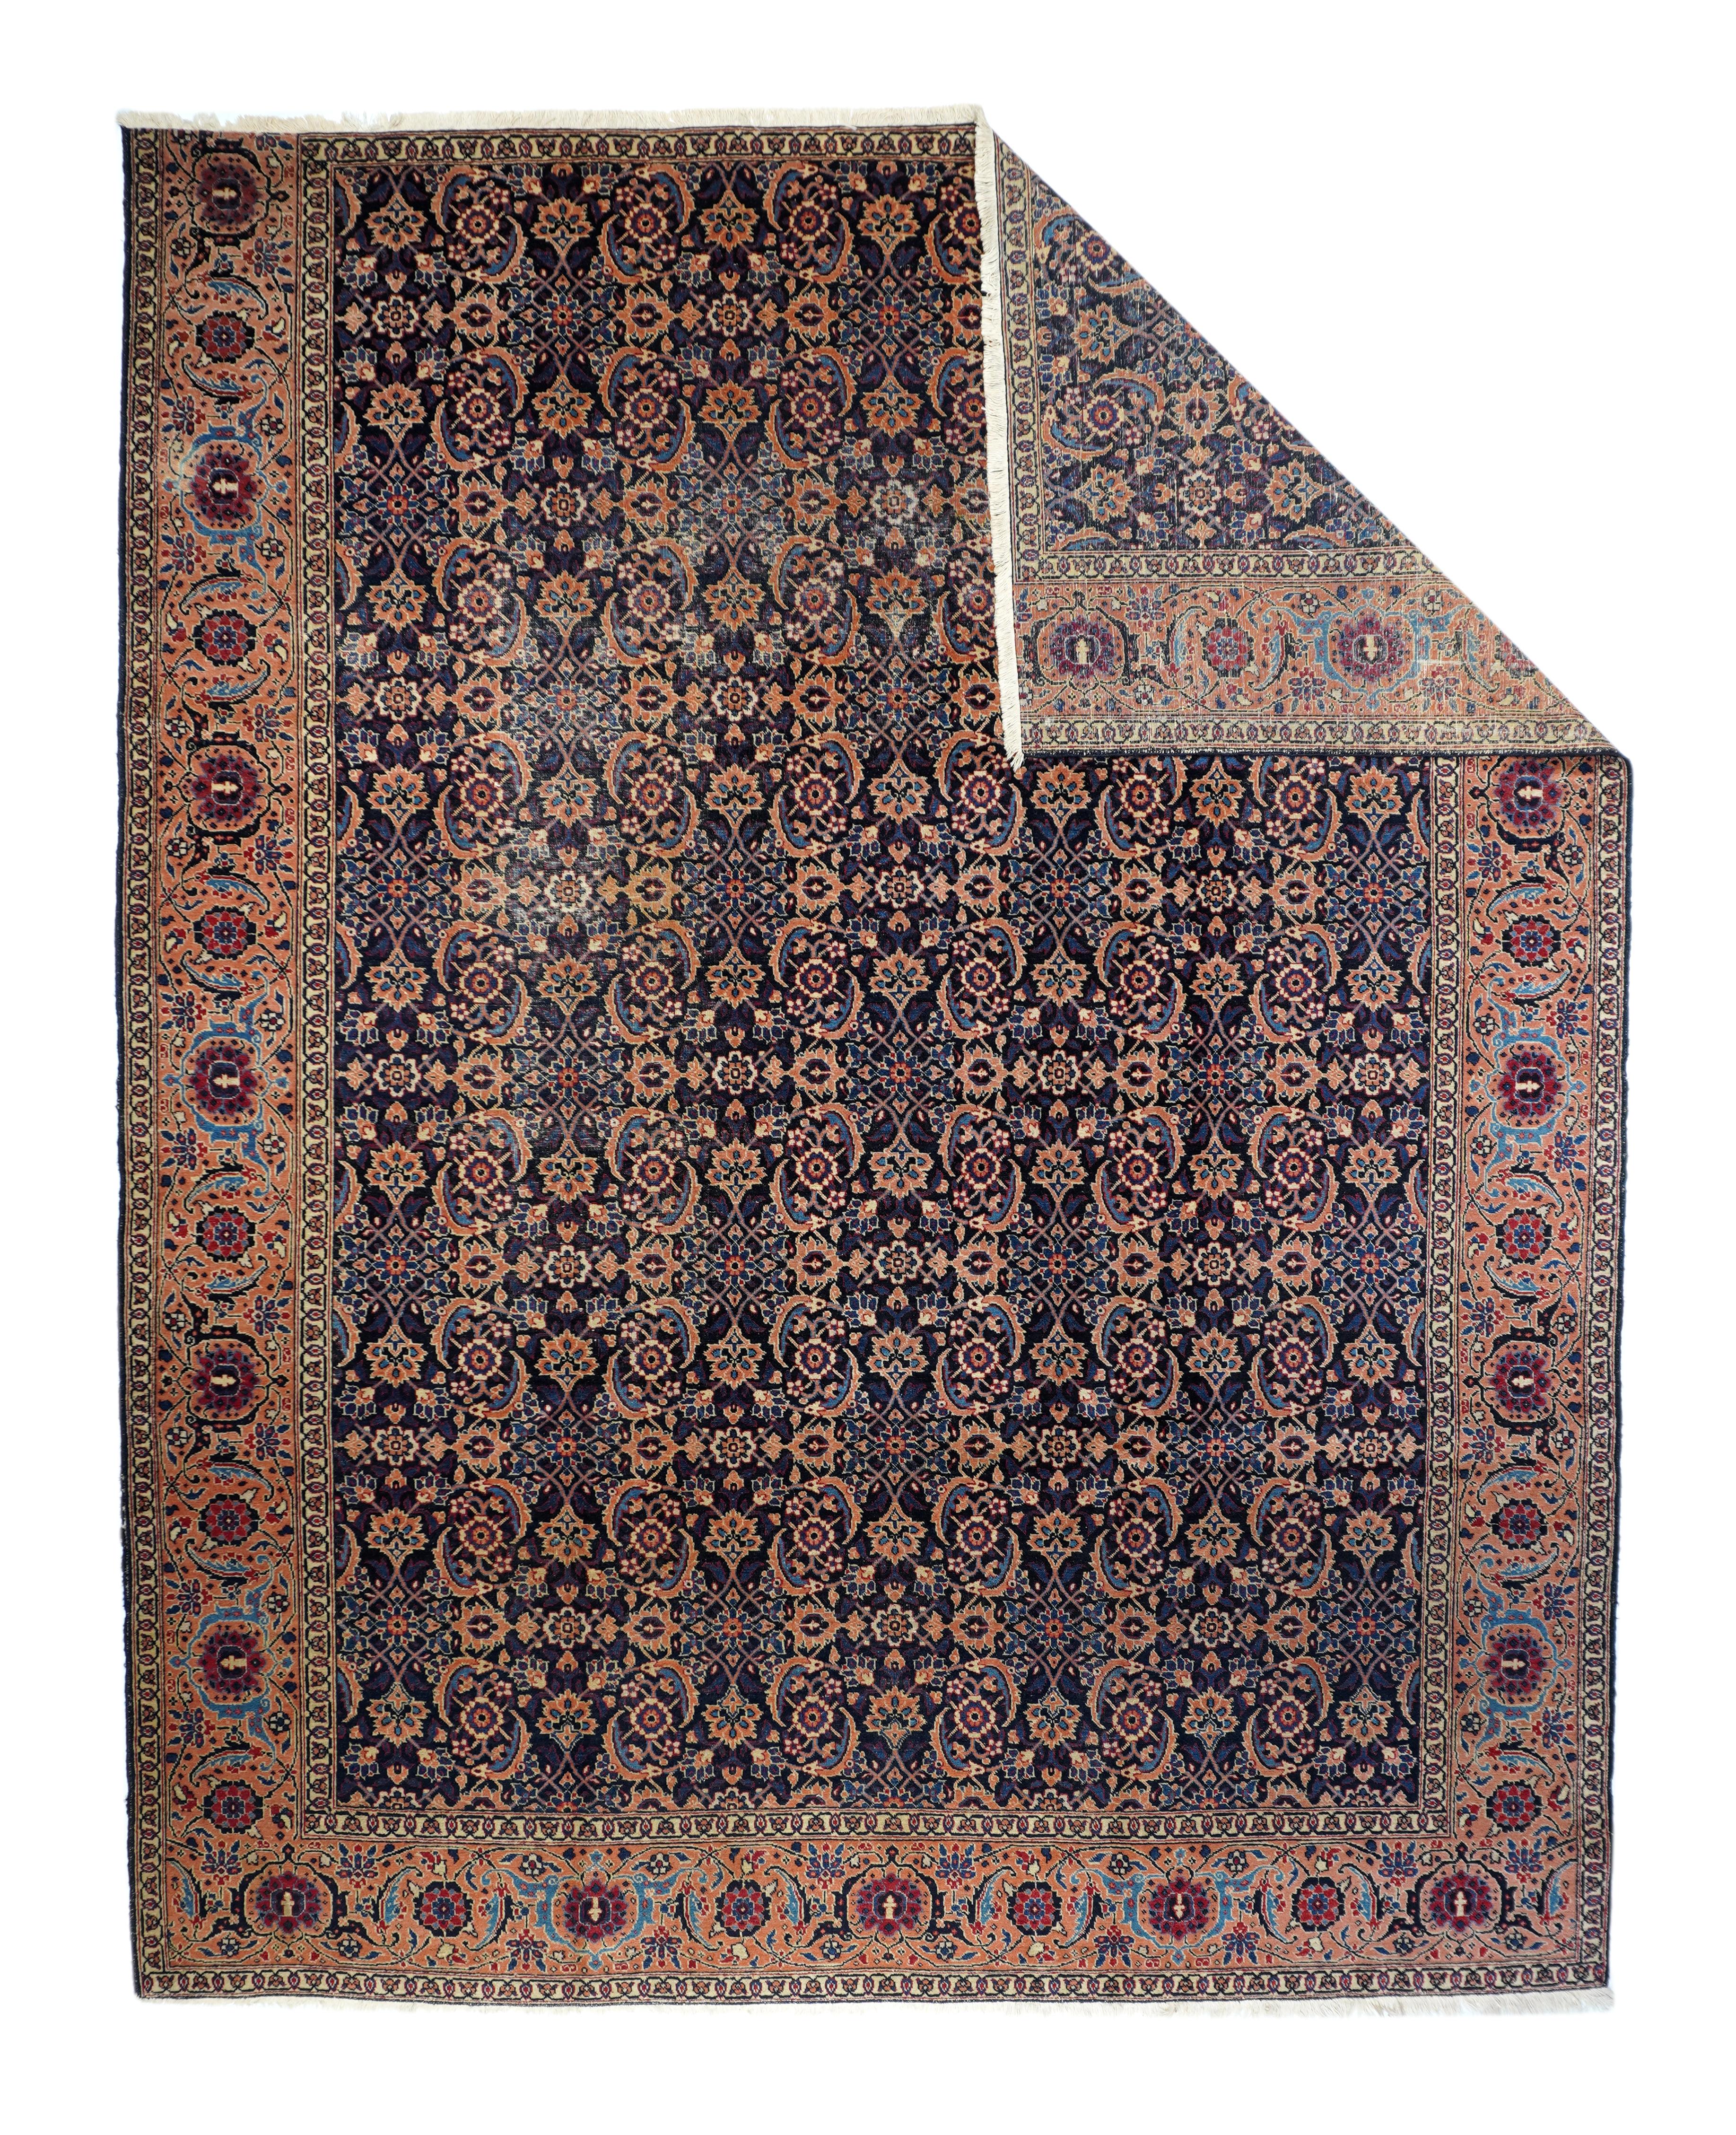 Vintage Tabriz Rug 8'10'' x 11'2''. The allover Herati pattern on navy creates a six-column over pattern of rosettes and swirling sickle leaves. Light blue accents. The pink border is three sided with an open reversing turtle and rosette pattern.